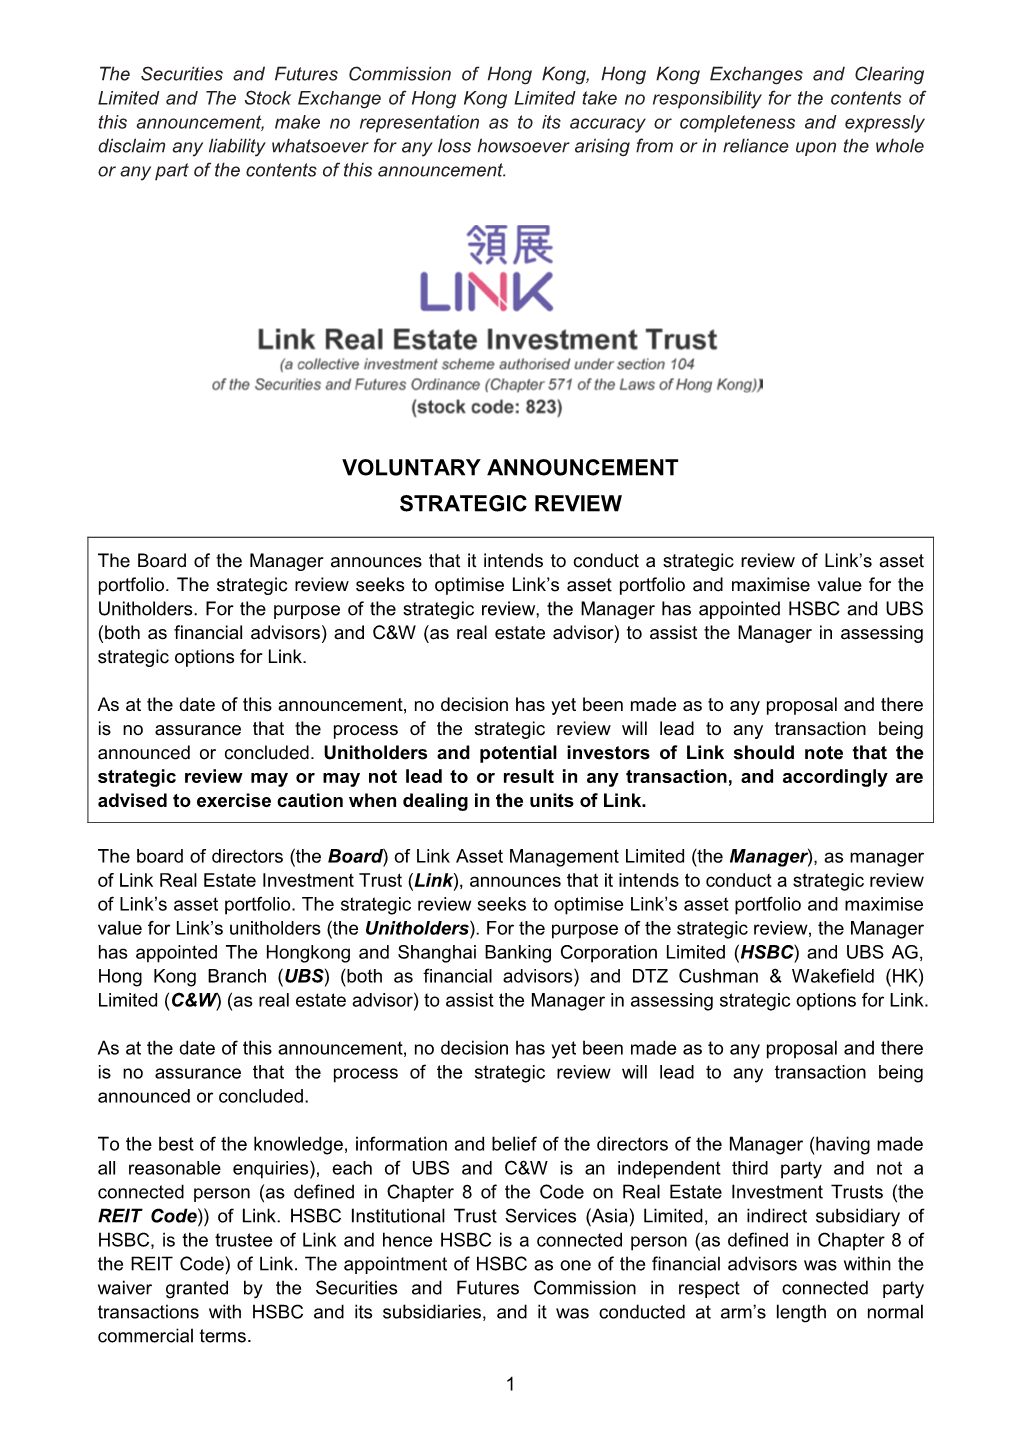 Voluntary Announcement Strategic Review